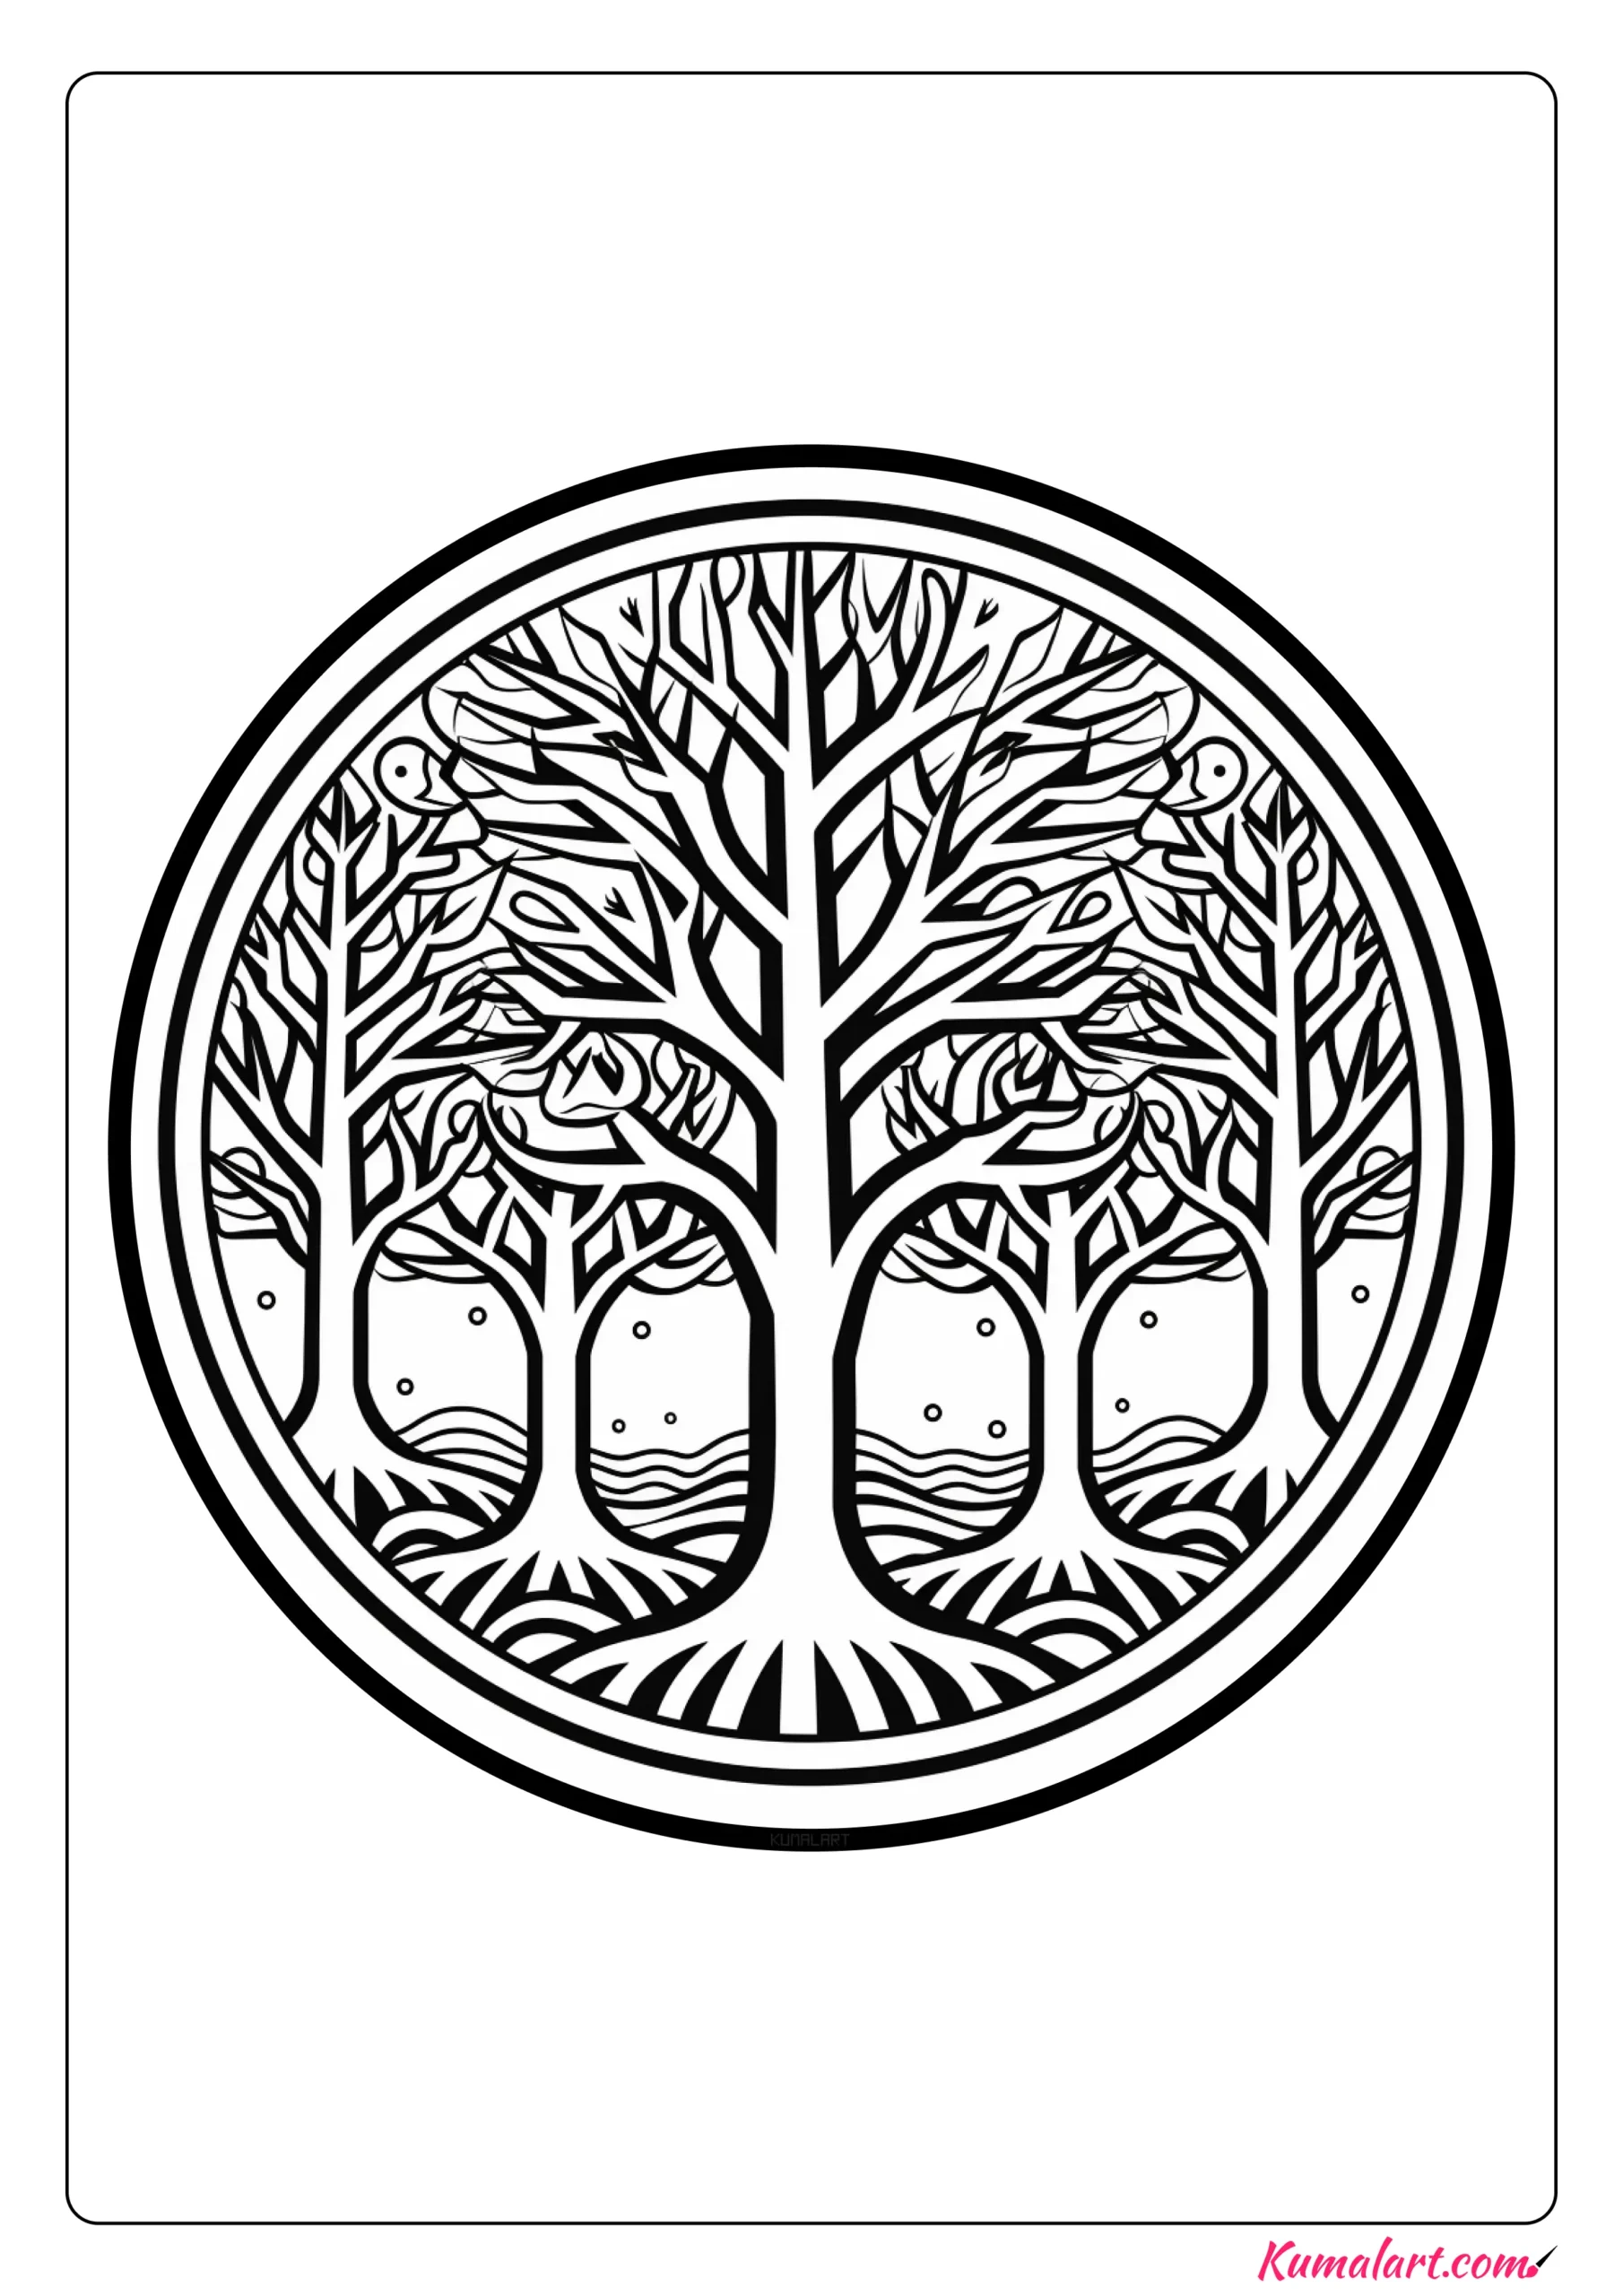 Magical Forest Coloring Page